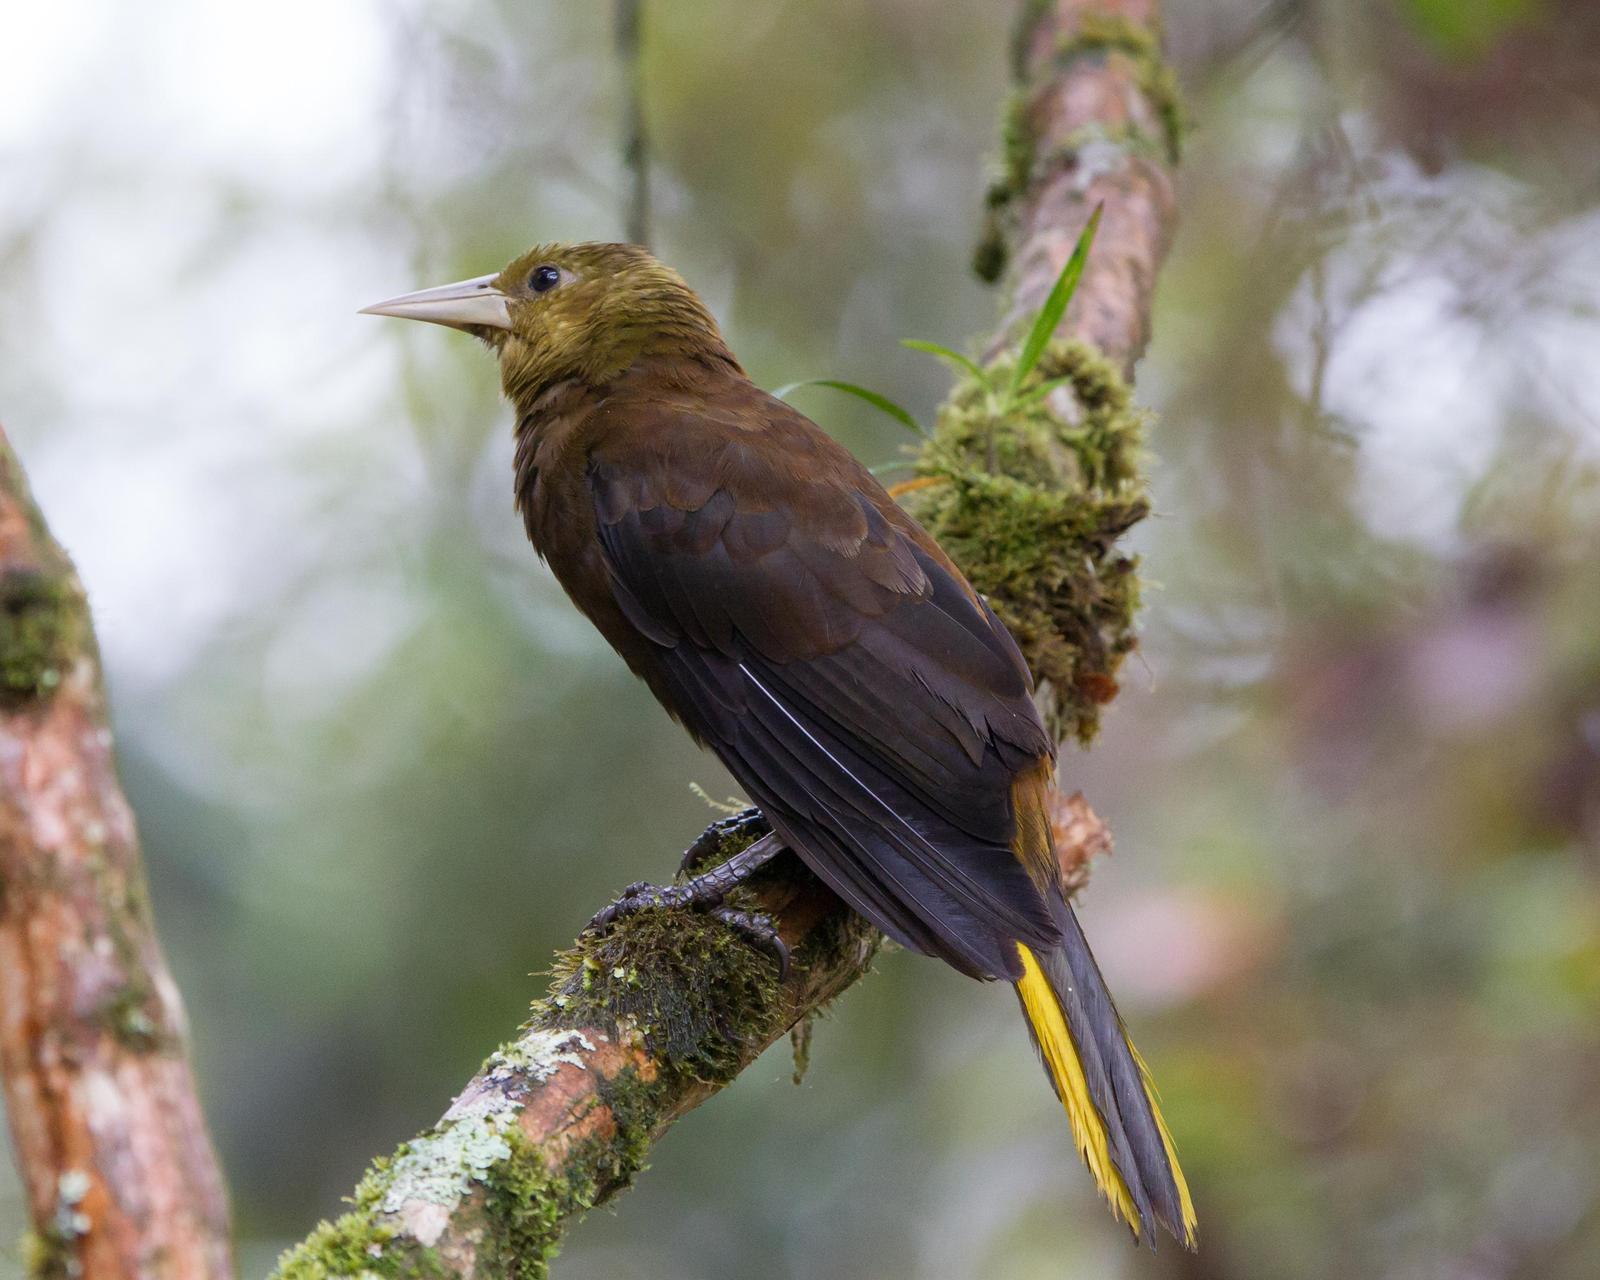 Russet-backed Oropendola Photo by Kevin Berkoff